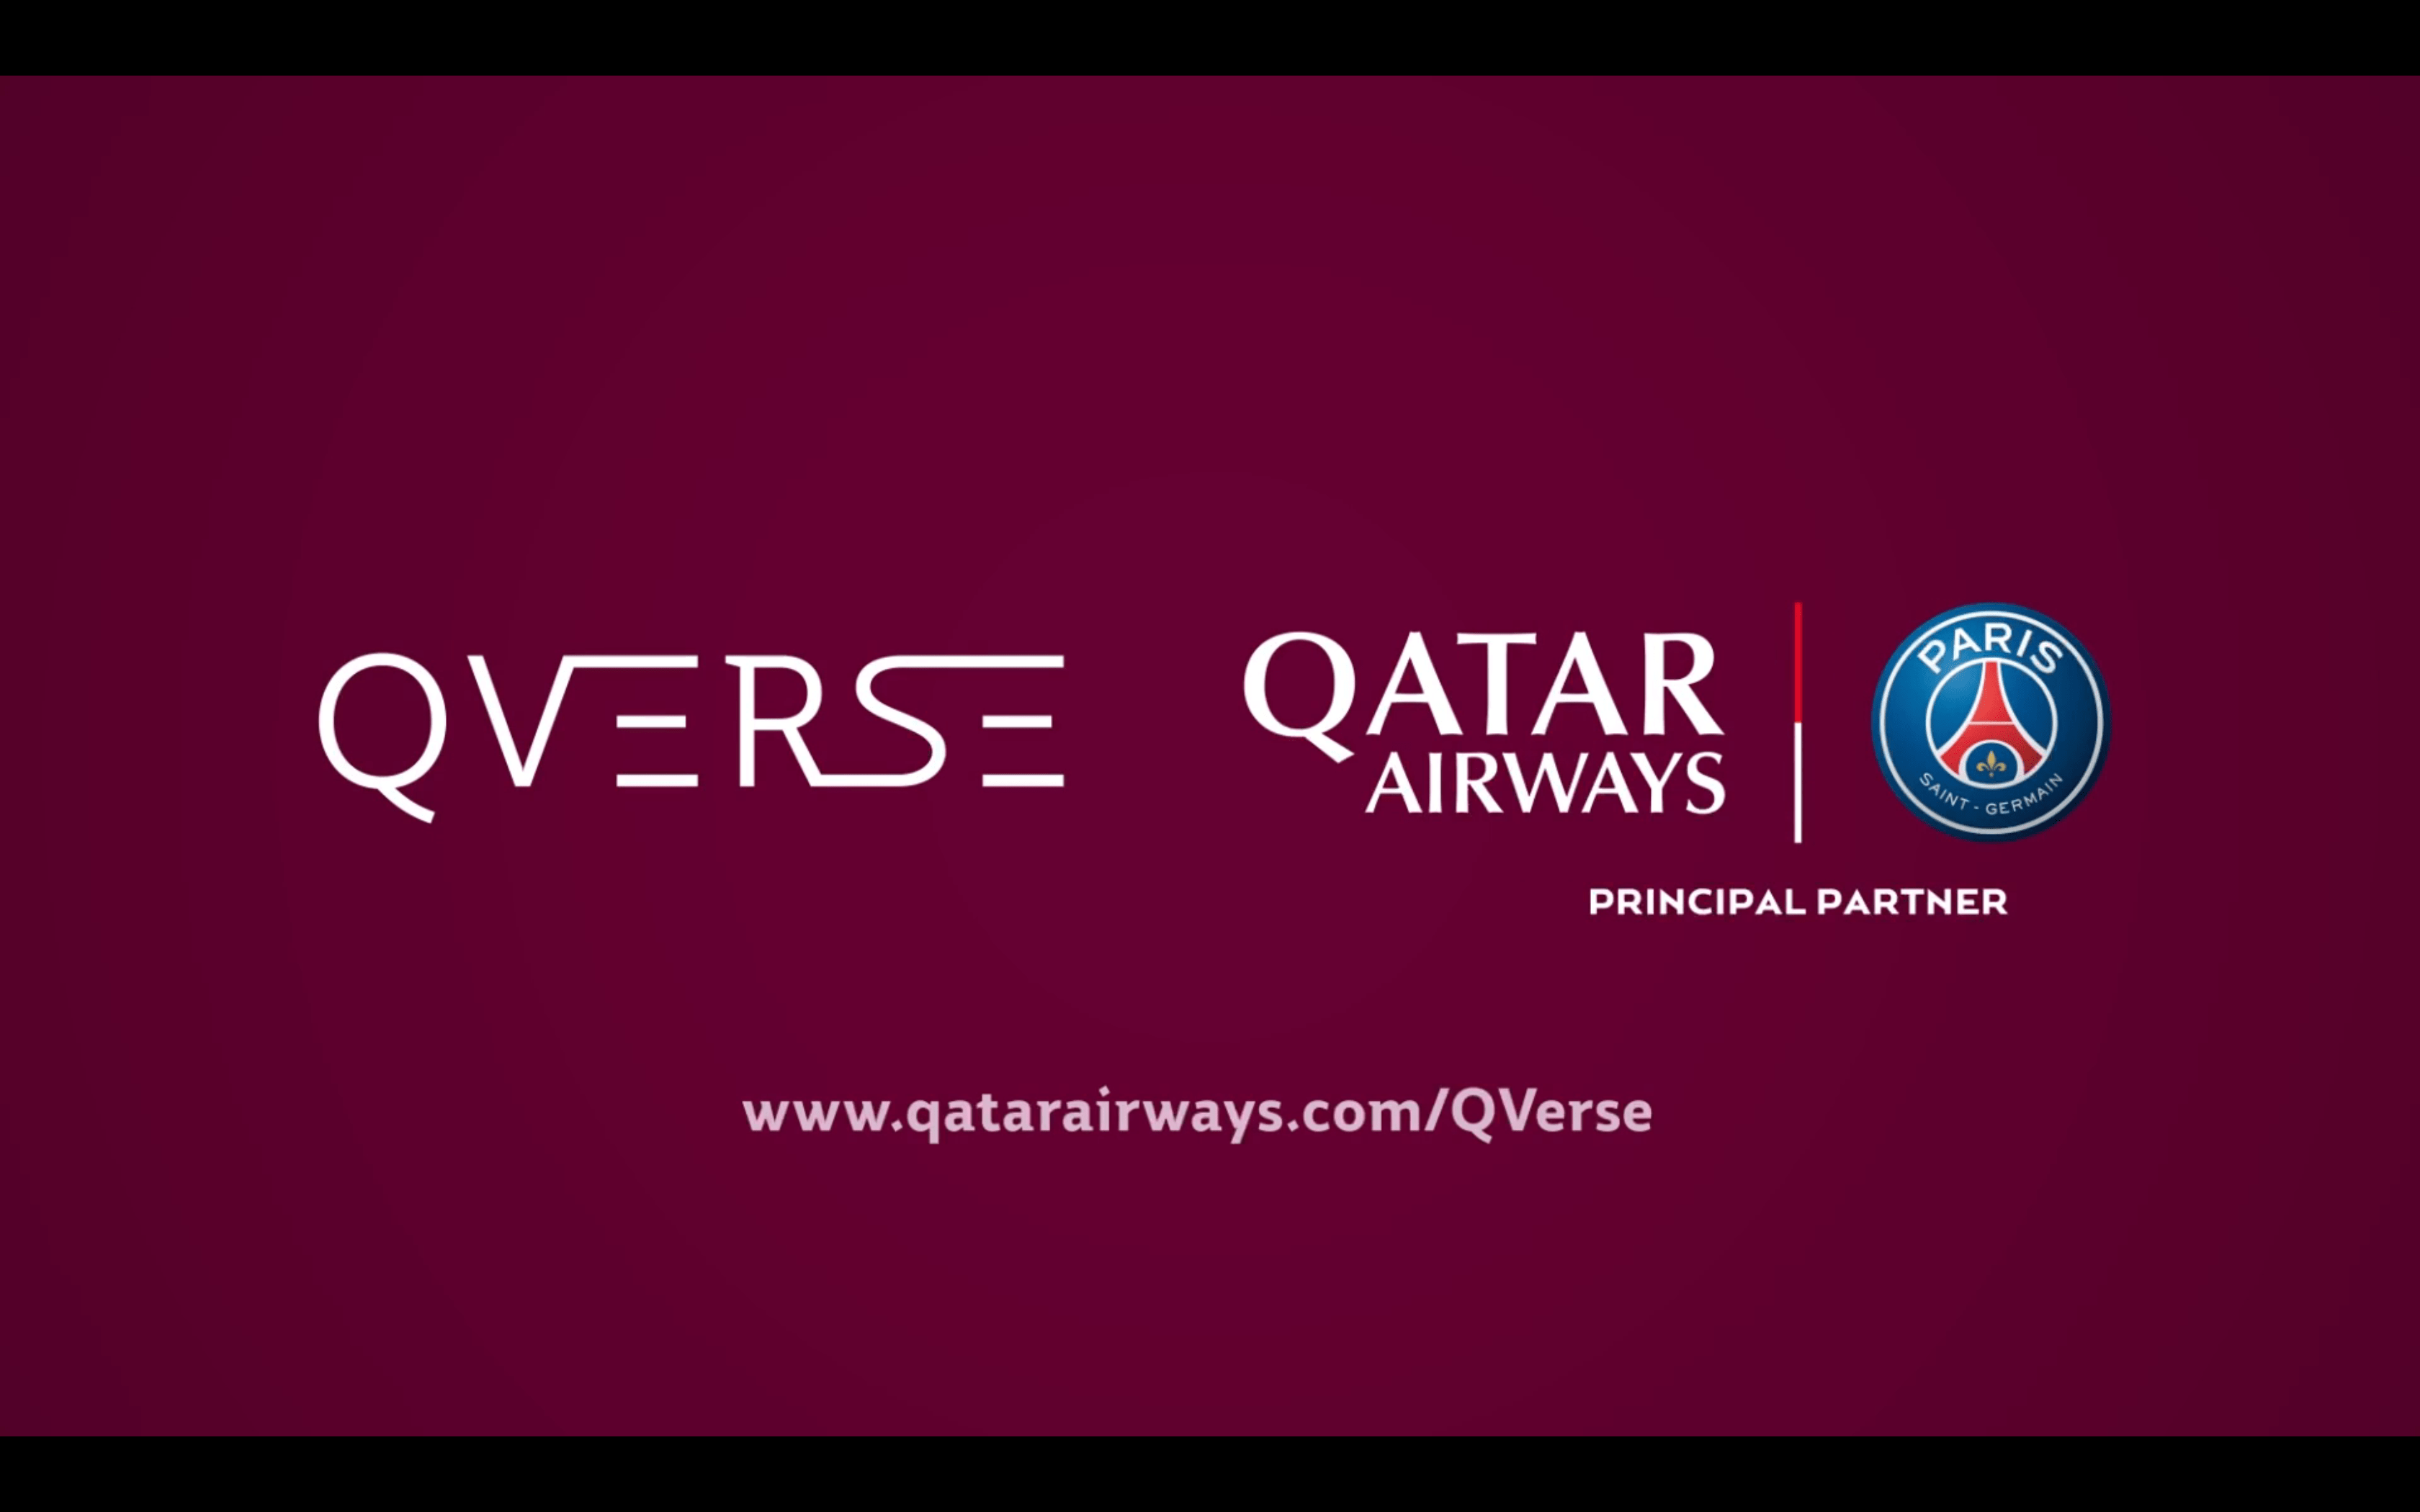 You are currently viewing Sound design and mix for Qatar Airways – QVerse